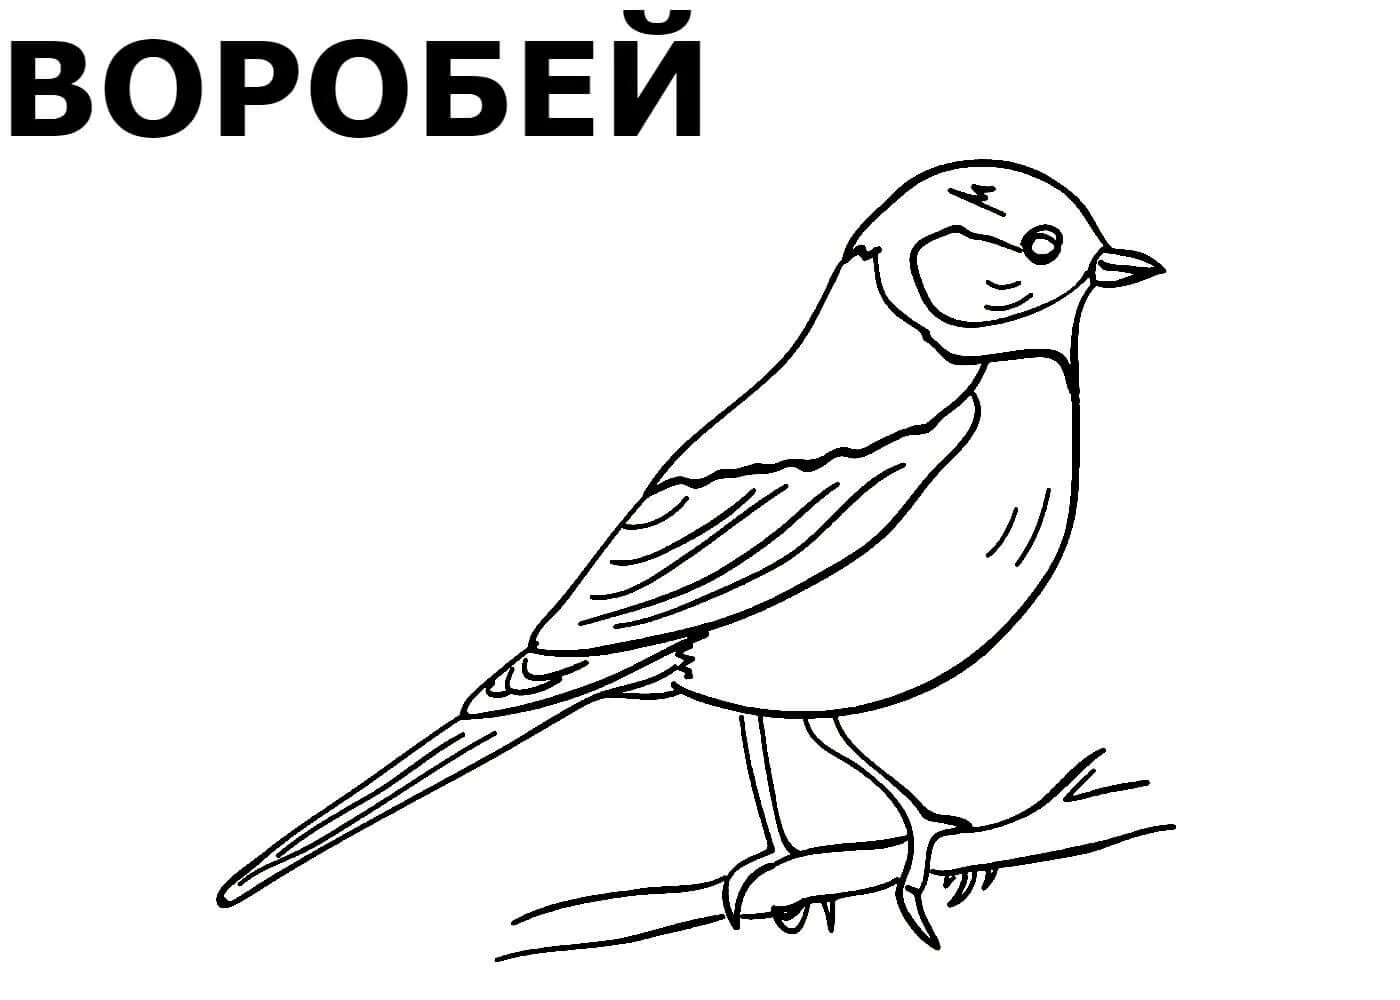 Colorific winter birds coloring page for children 3-4 years old